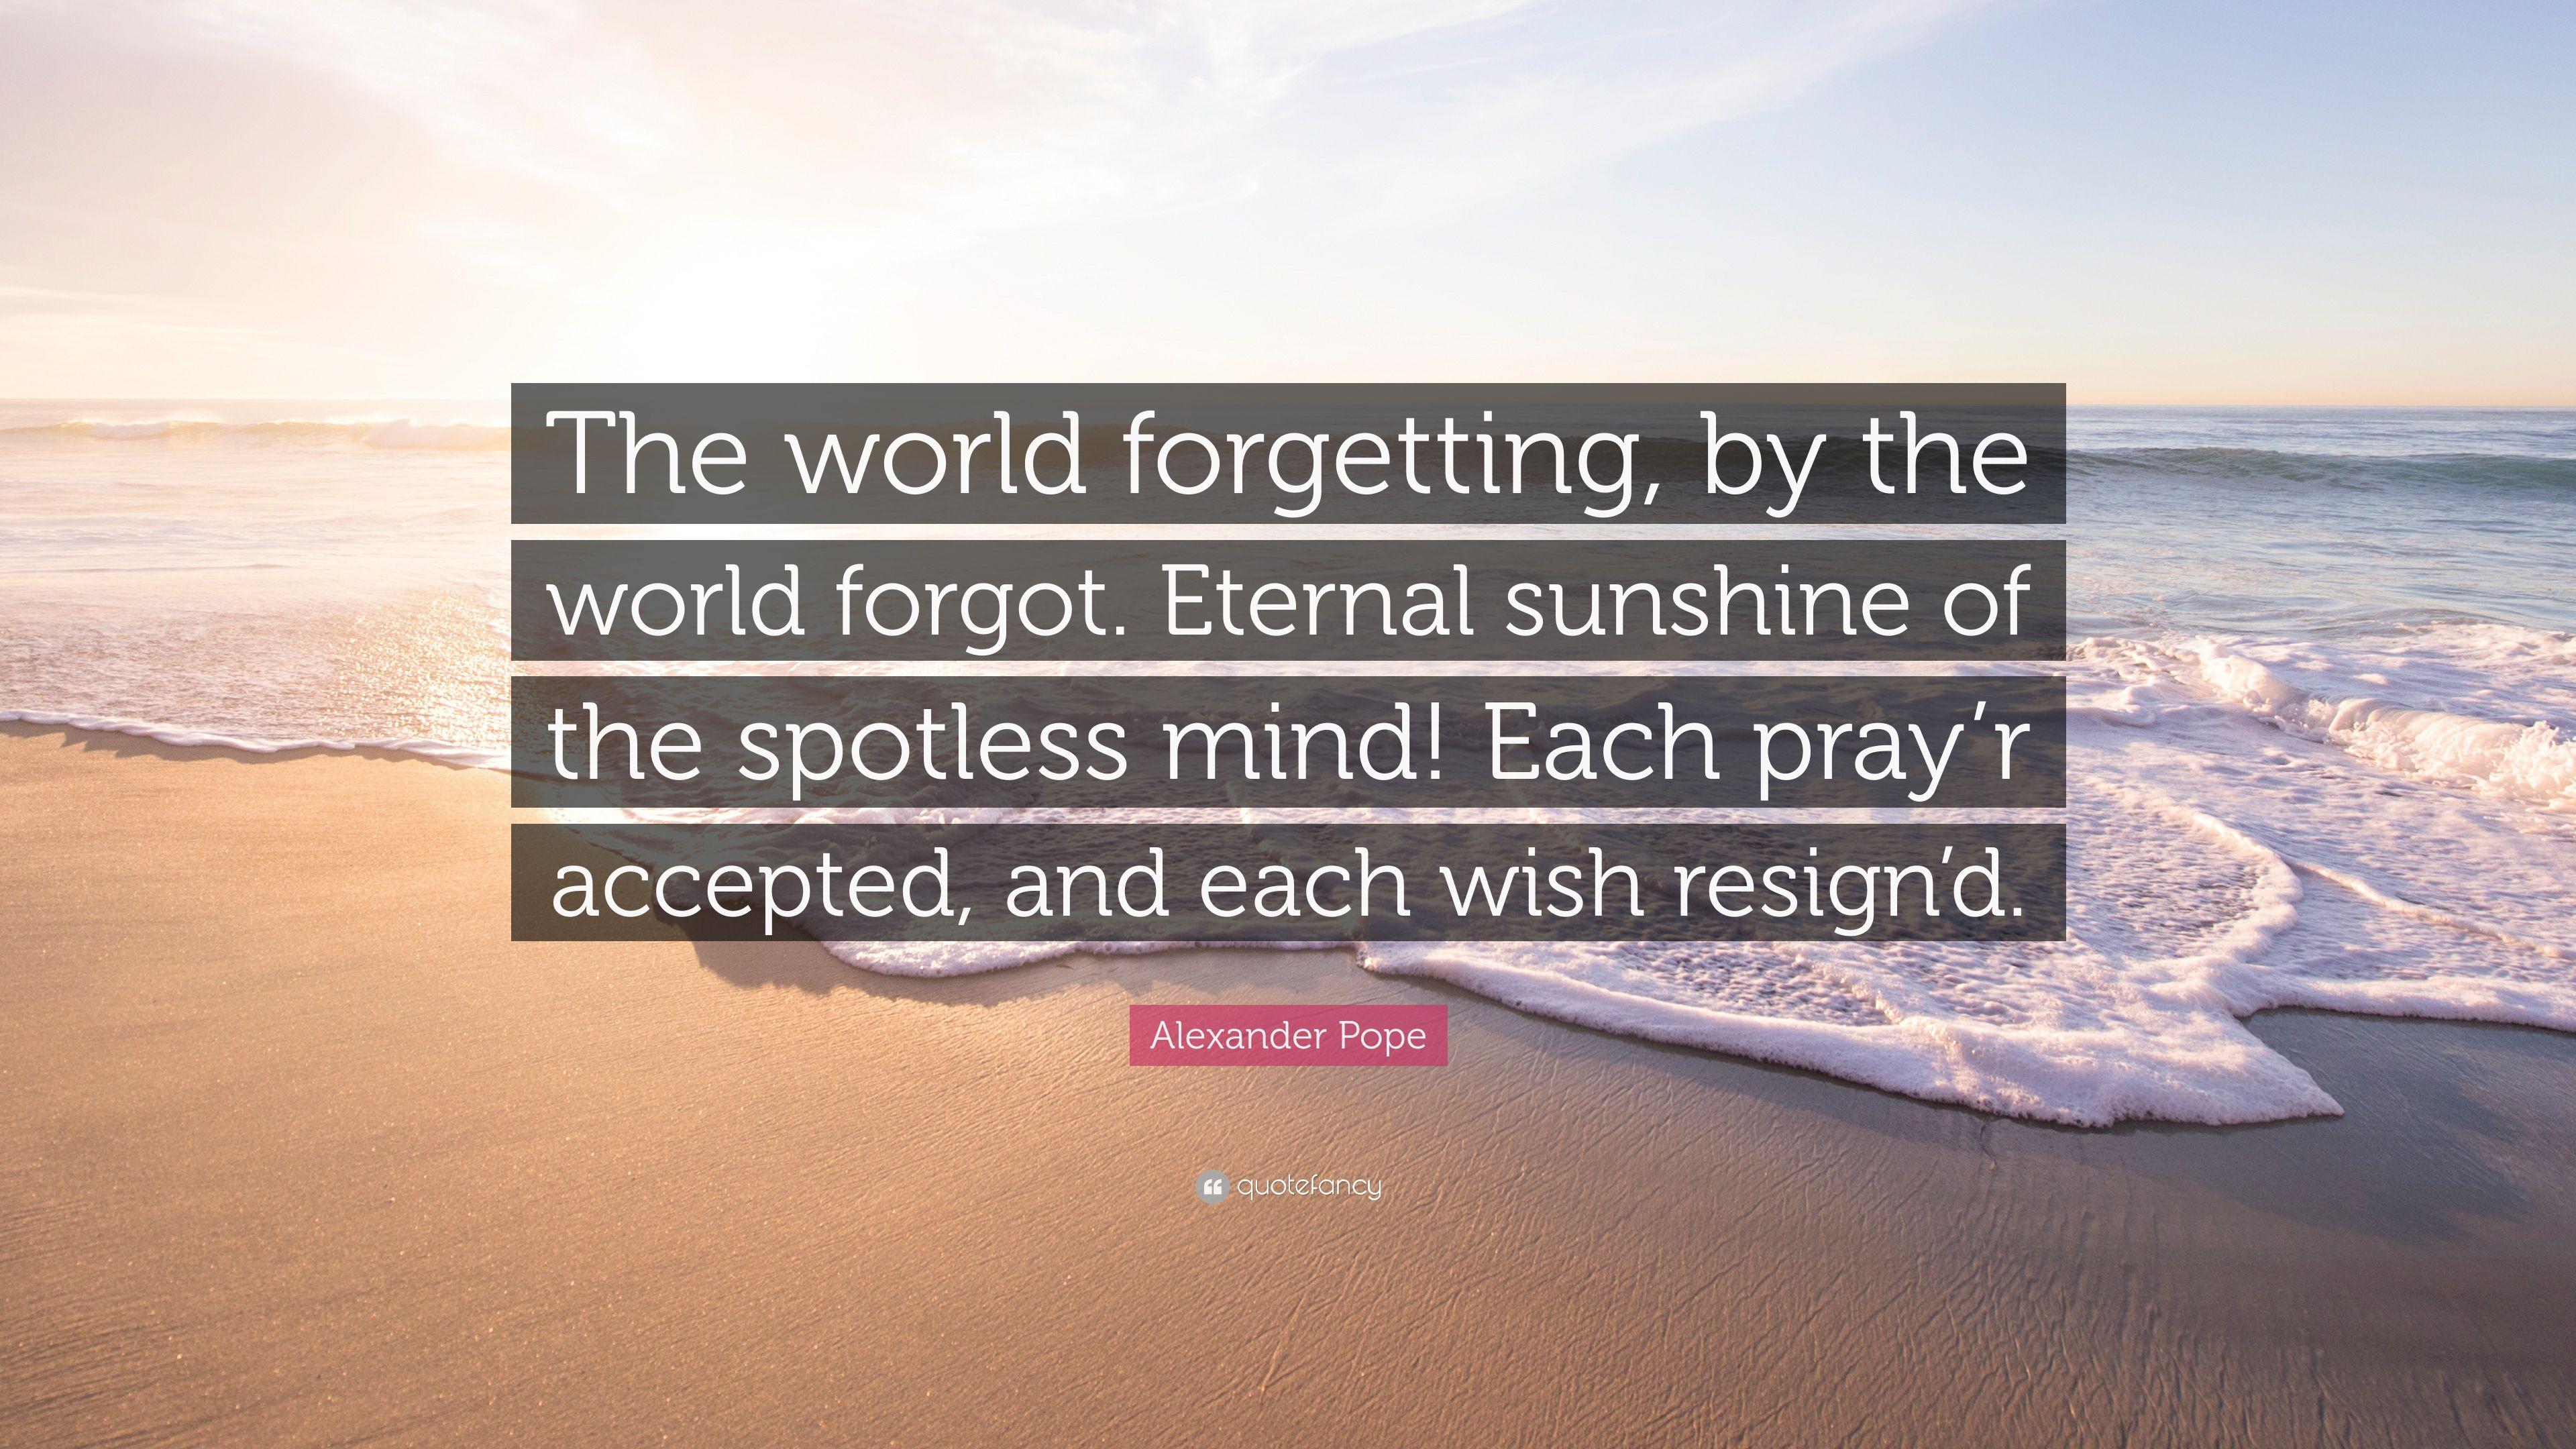 Alexander Pope Quote: “The world forgetting, by the world forgot